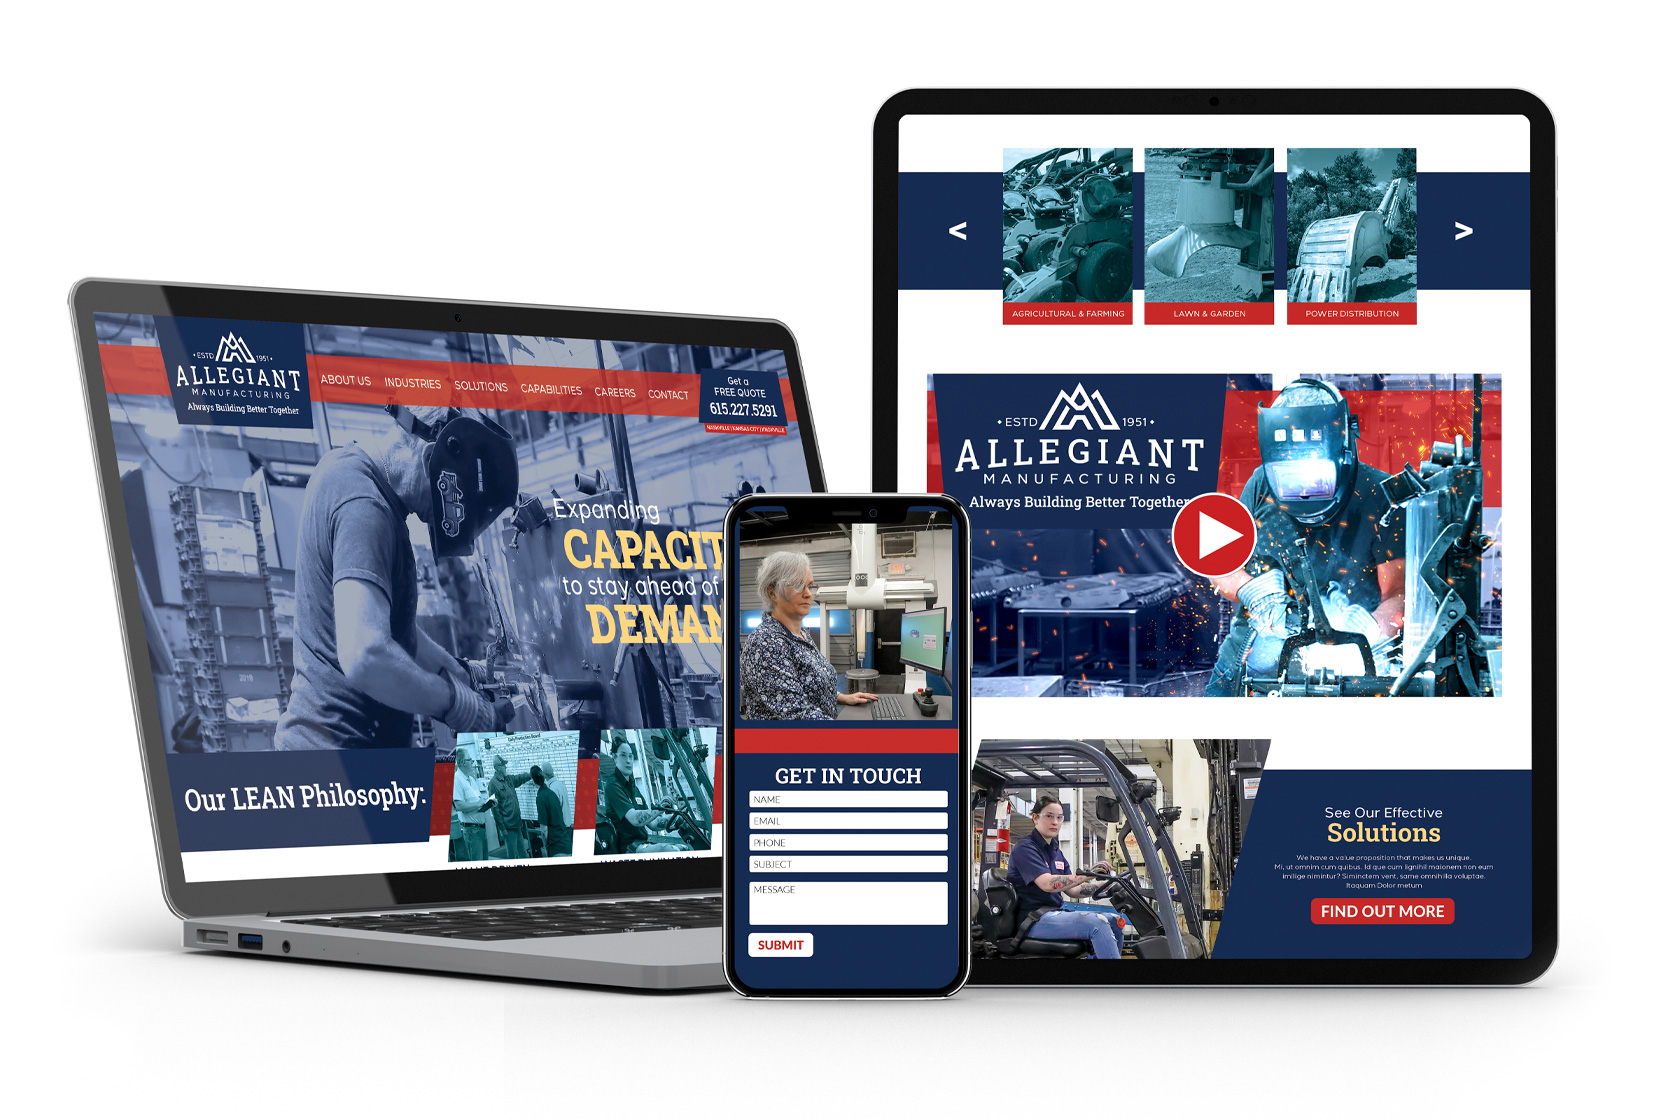 Allegiant Manufacturing Website Design Mockup with Phone, iPad, and Computer